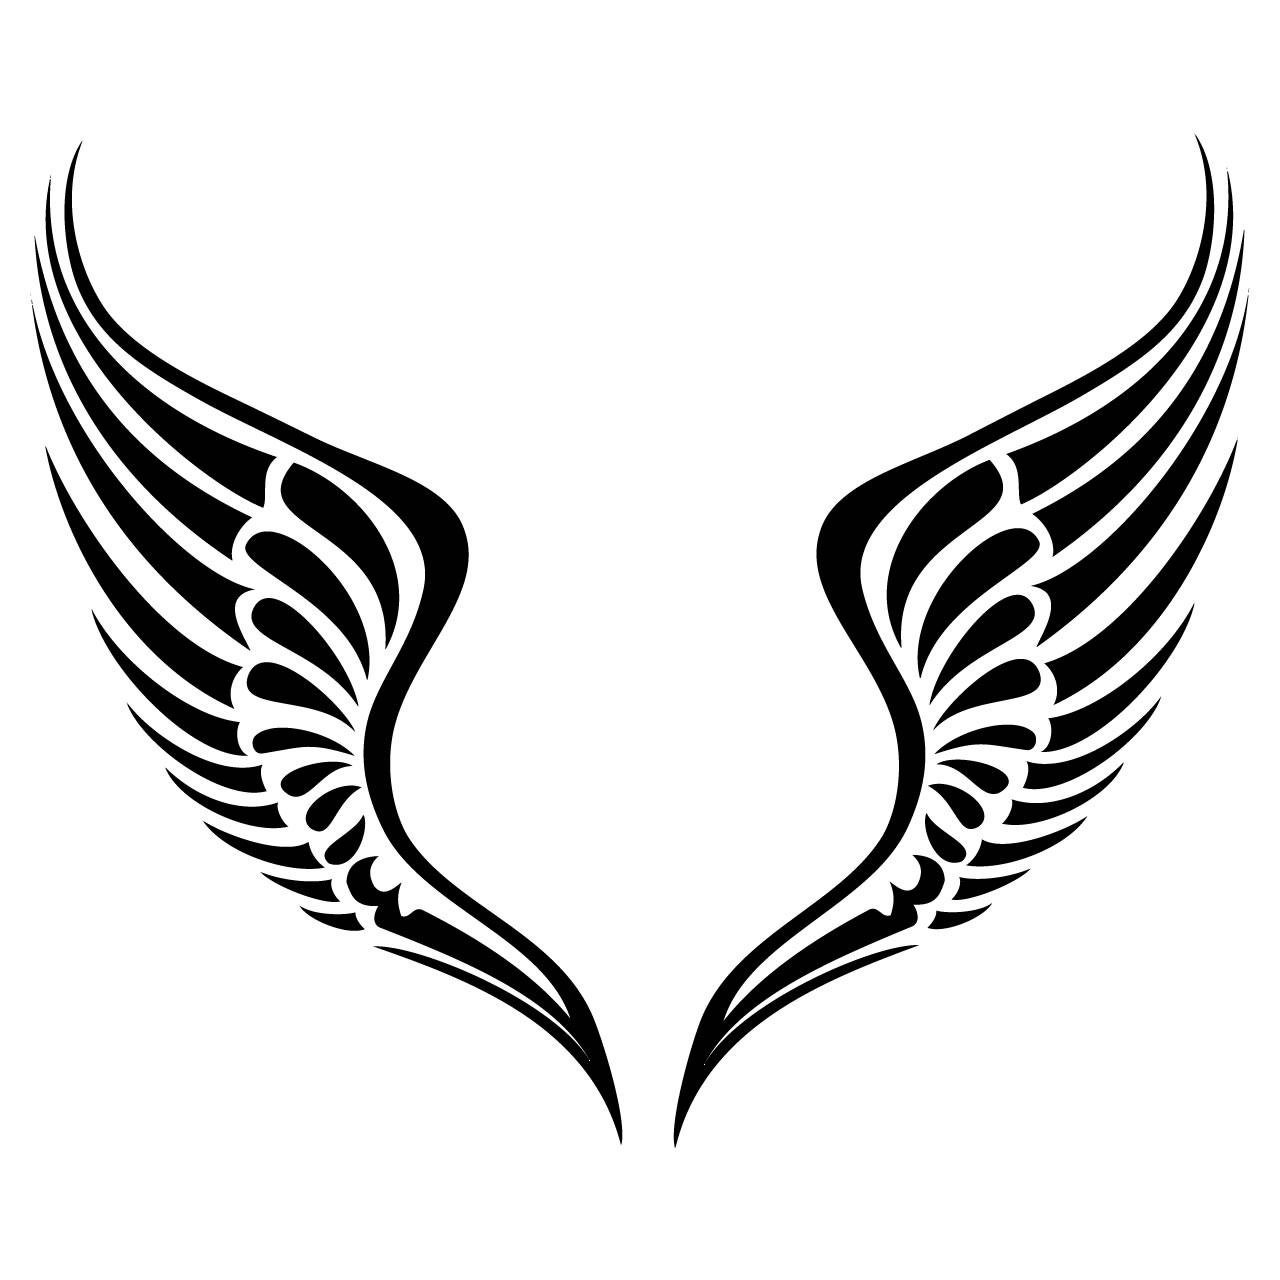 Angel wing clip art free vector of angel wings tattoo free image 3 ...